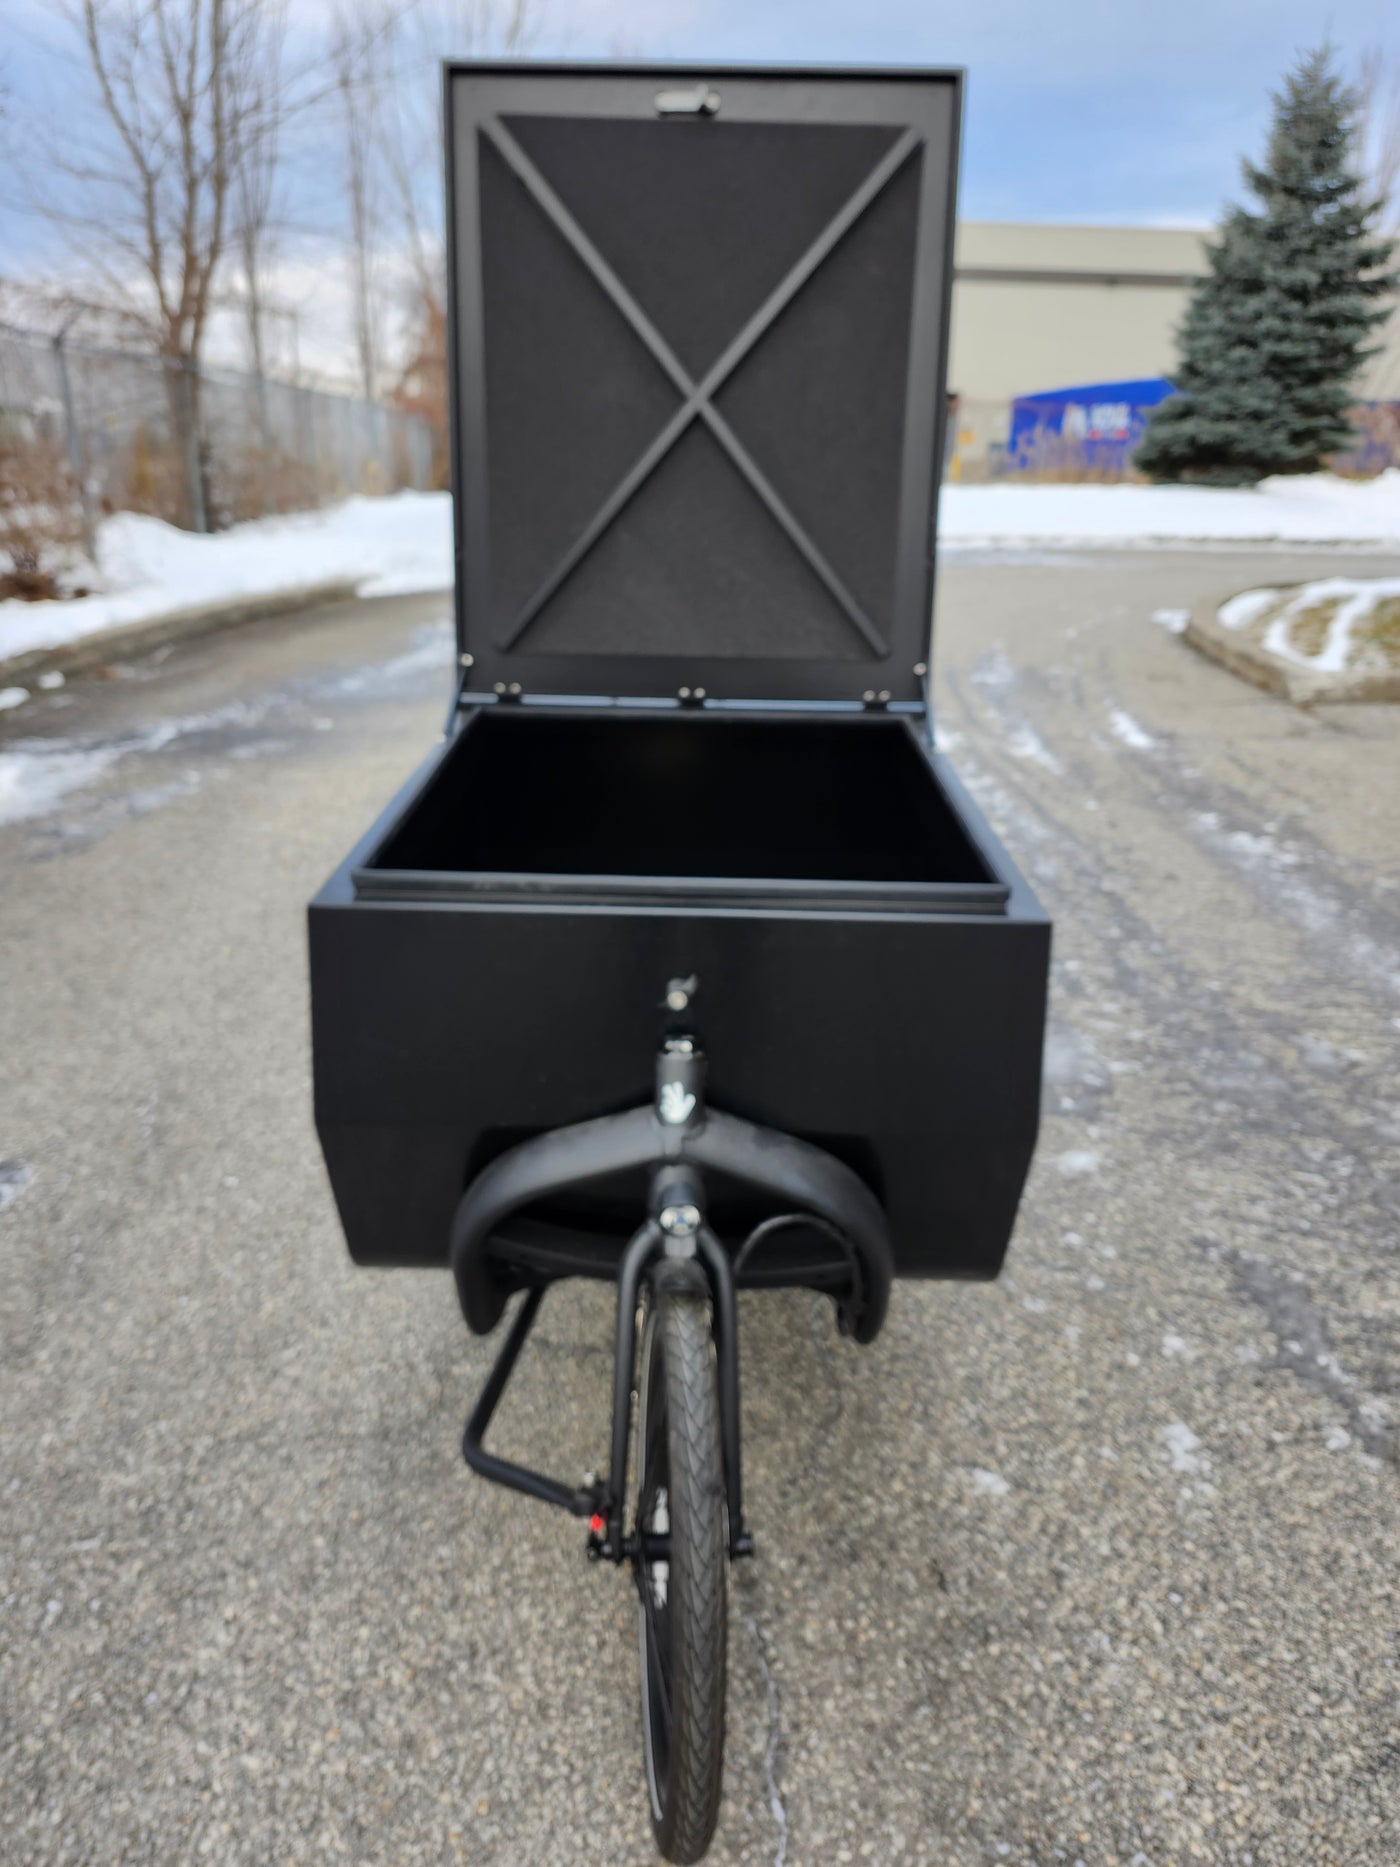 Triobike Cargo Big Flight Cases - Final Mile Cargo Transport and Delivery